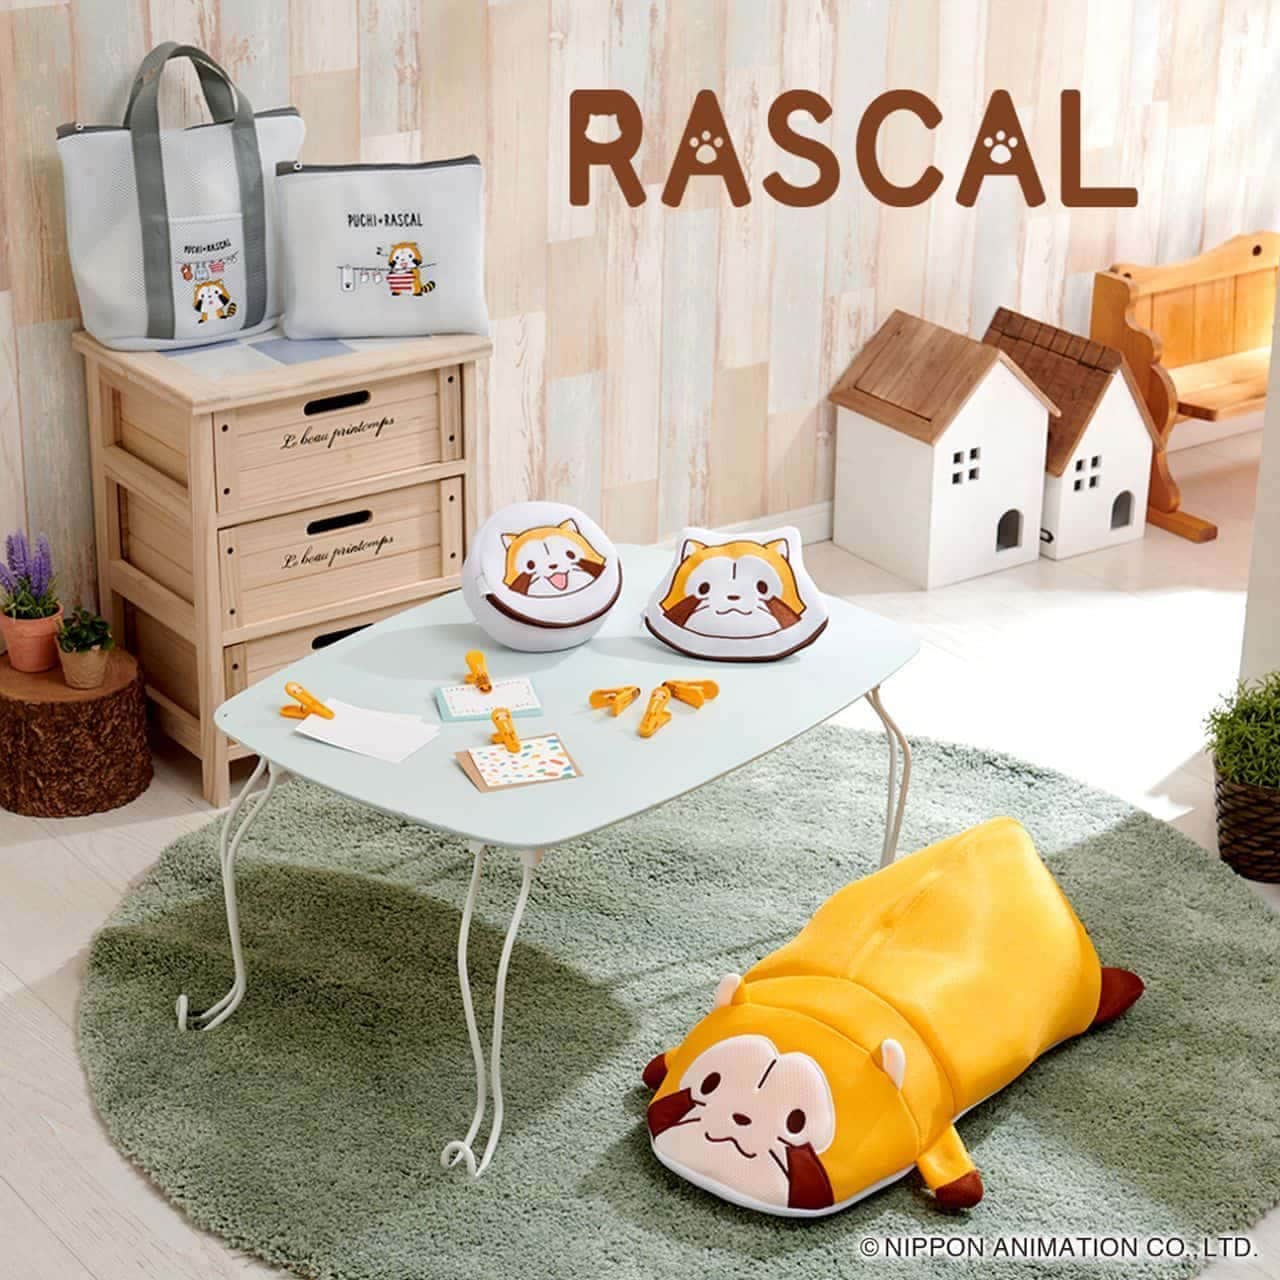 Laundry products with diamond rascal design